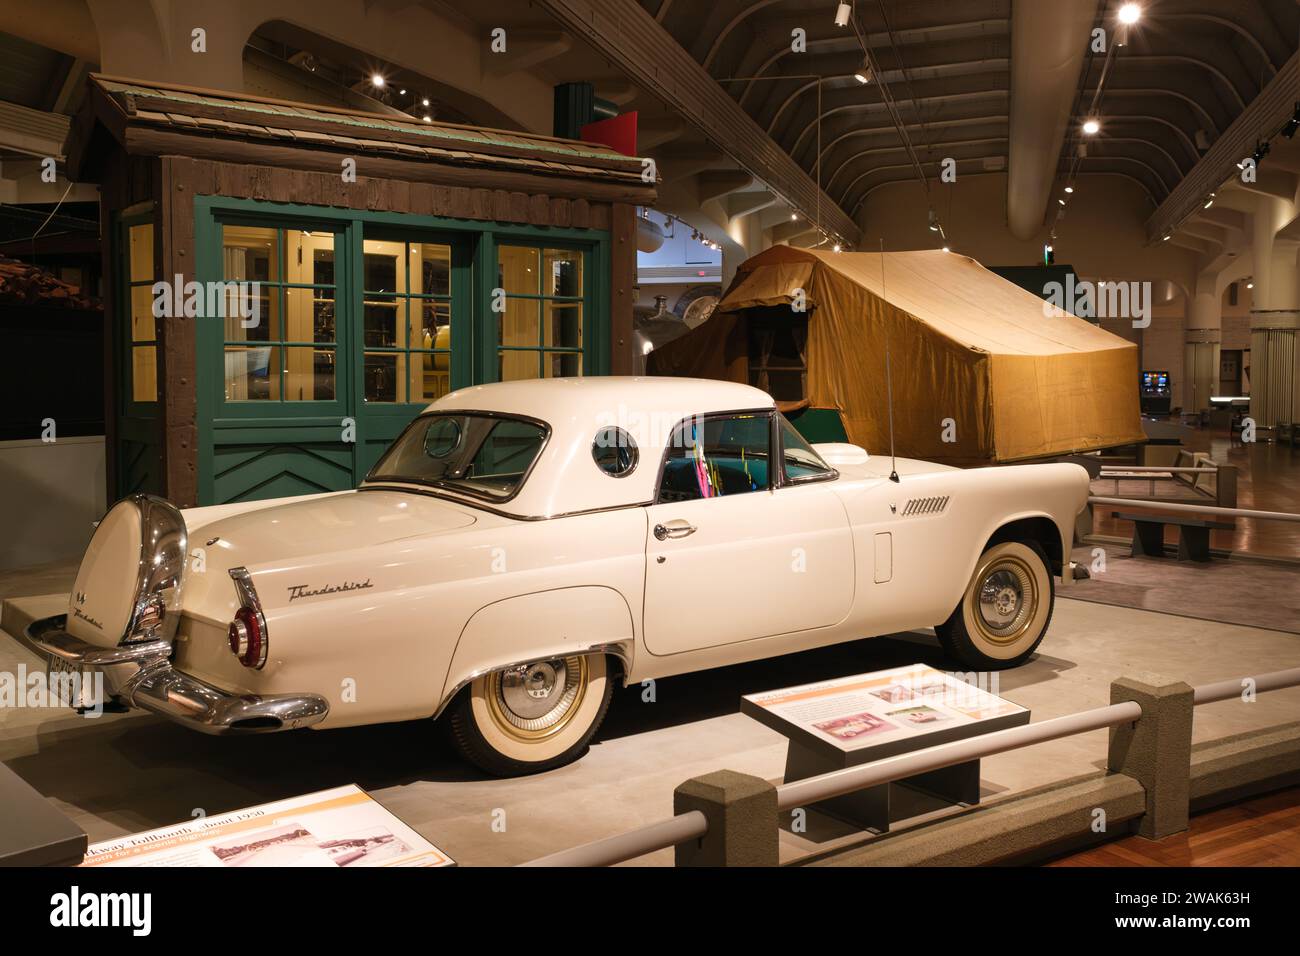 1956 Ford Thunderbird on display at The Henry Ford Museum of American Innovation, Dearborn Michigan USA Stock Photo